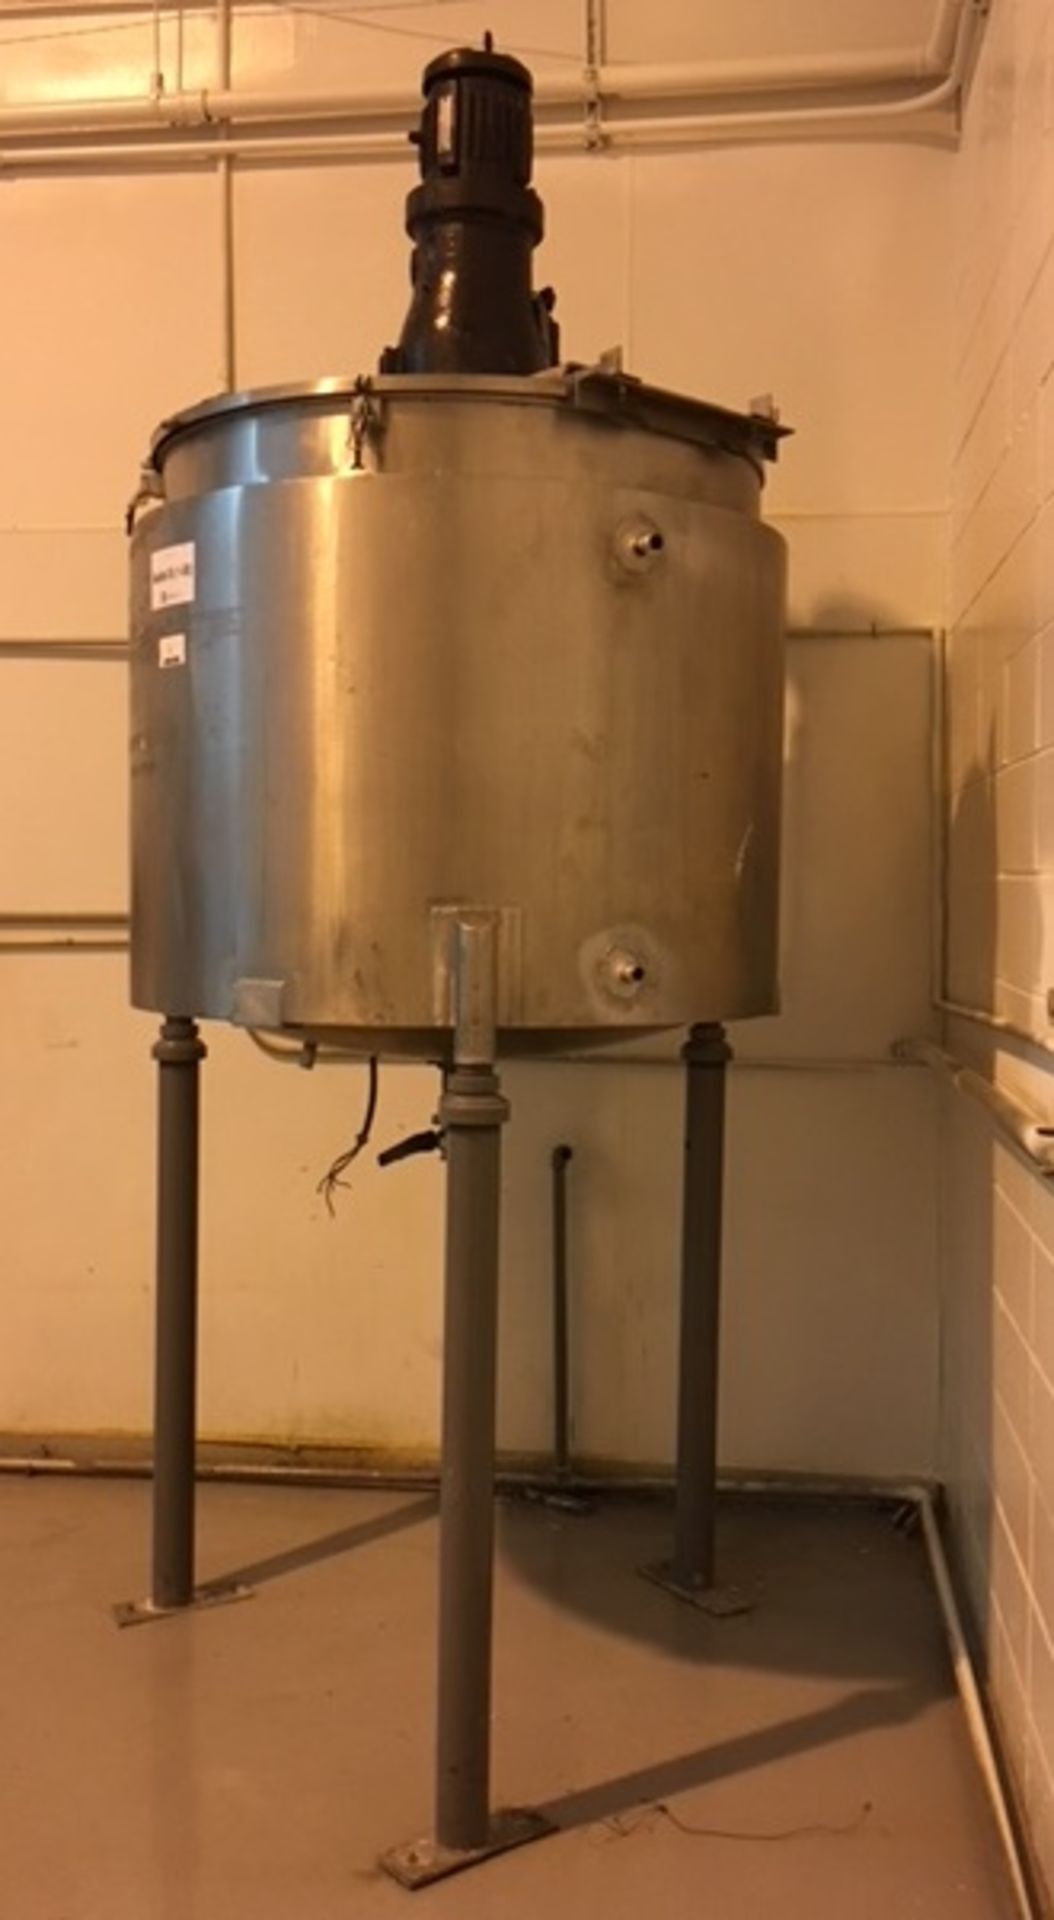 Stricklin 180 Gallon Stainless Steel Jacketd Single Action Tank. 1 HP, 220/440 volt drive motor. 48" - Image 2 of 3